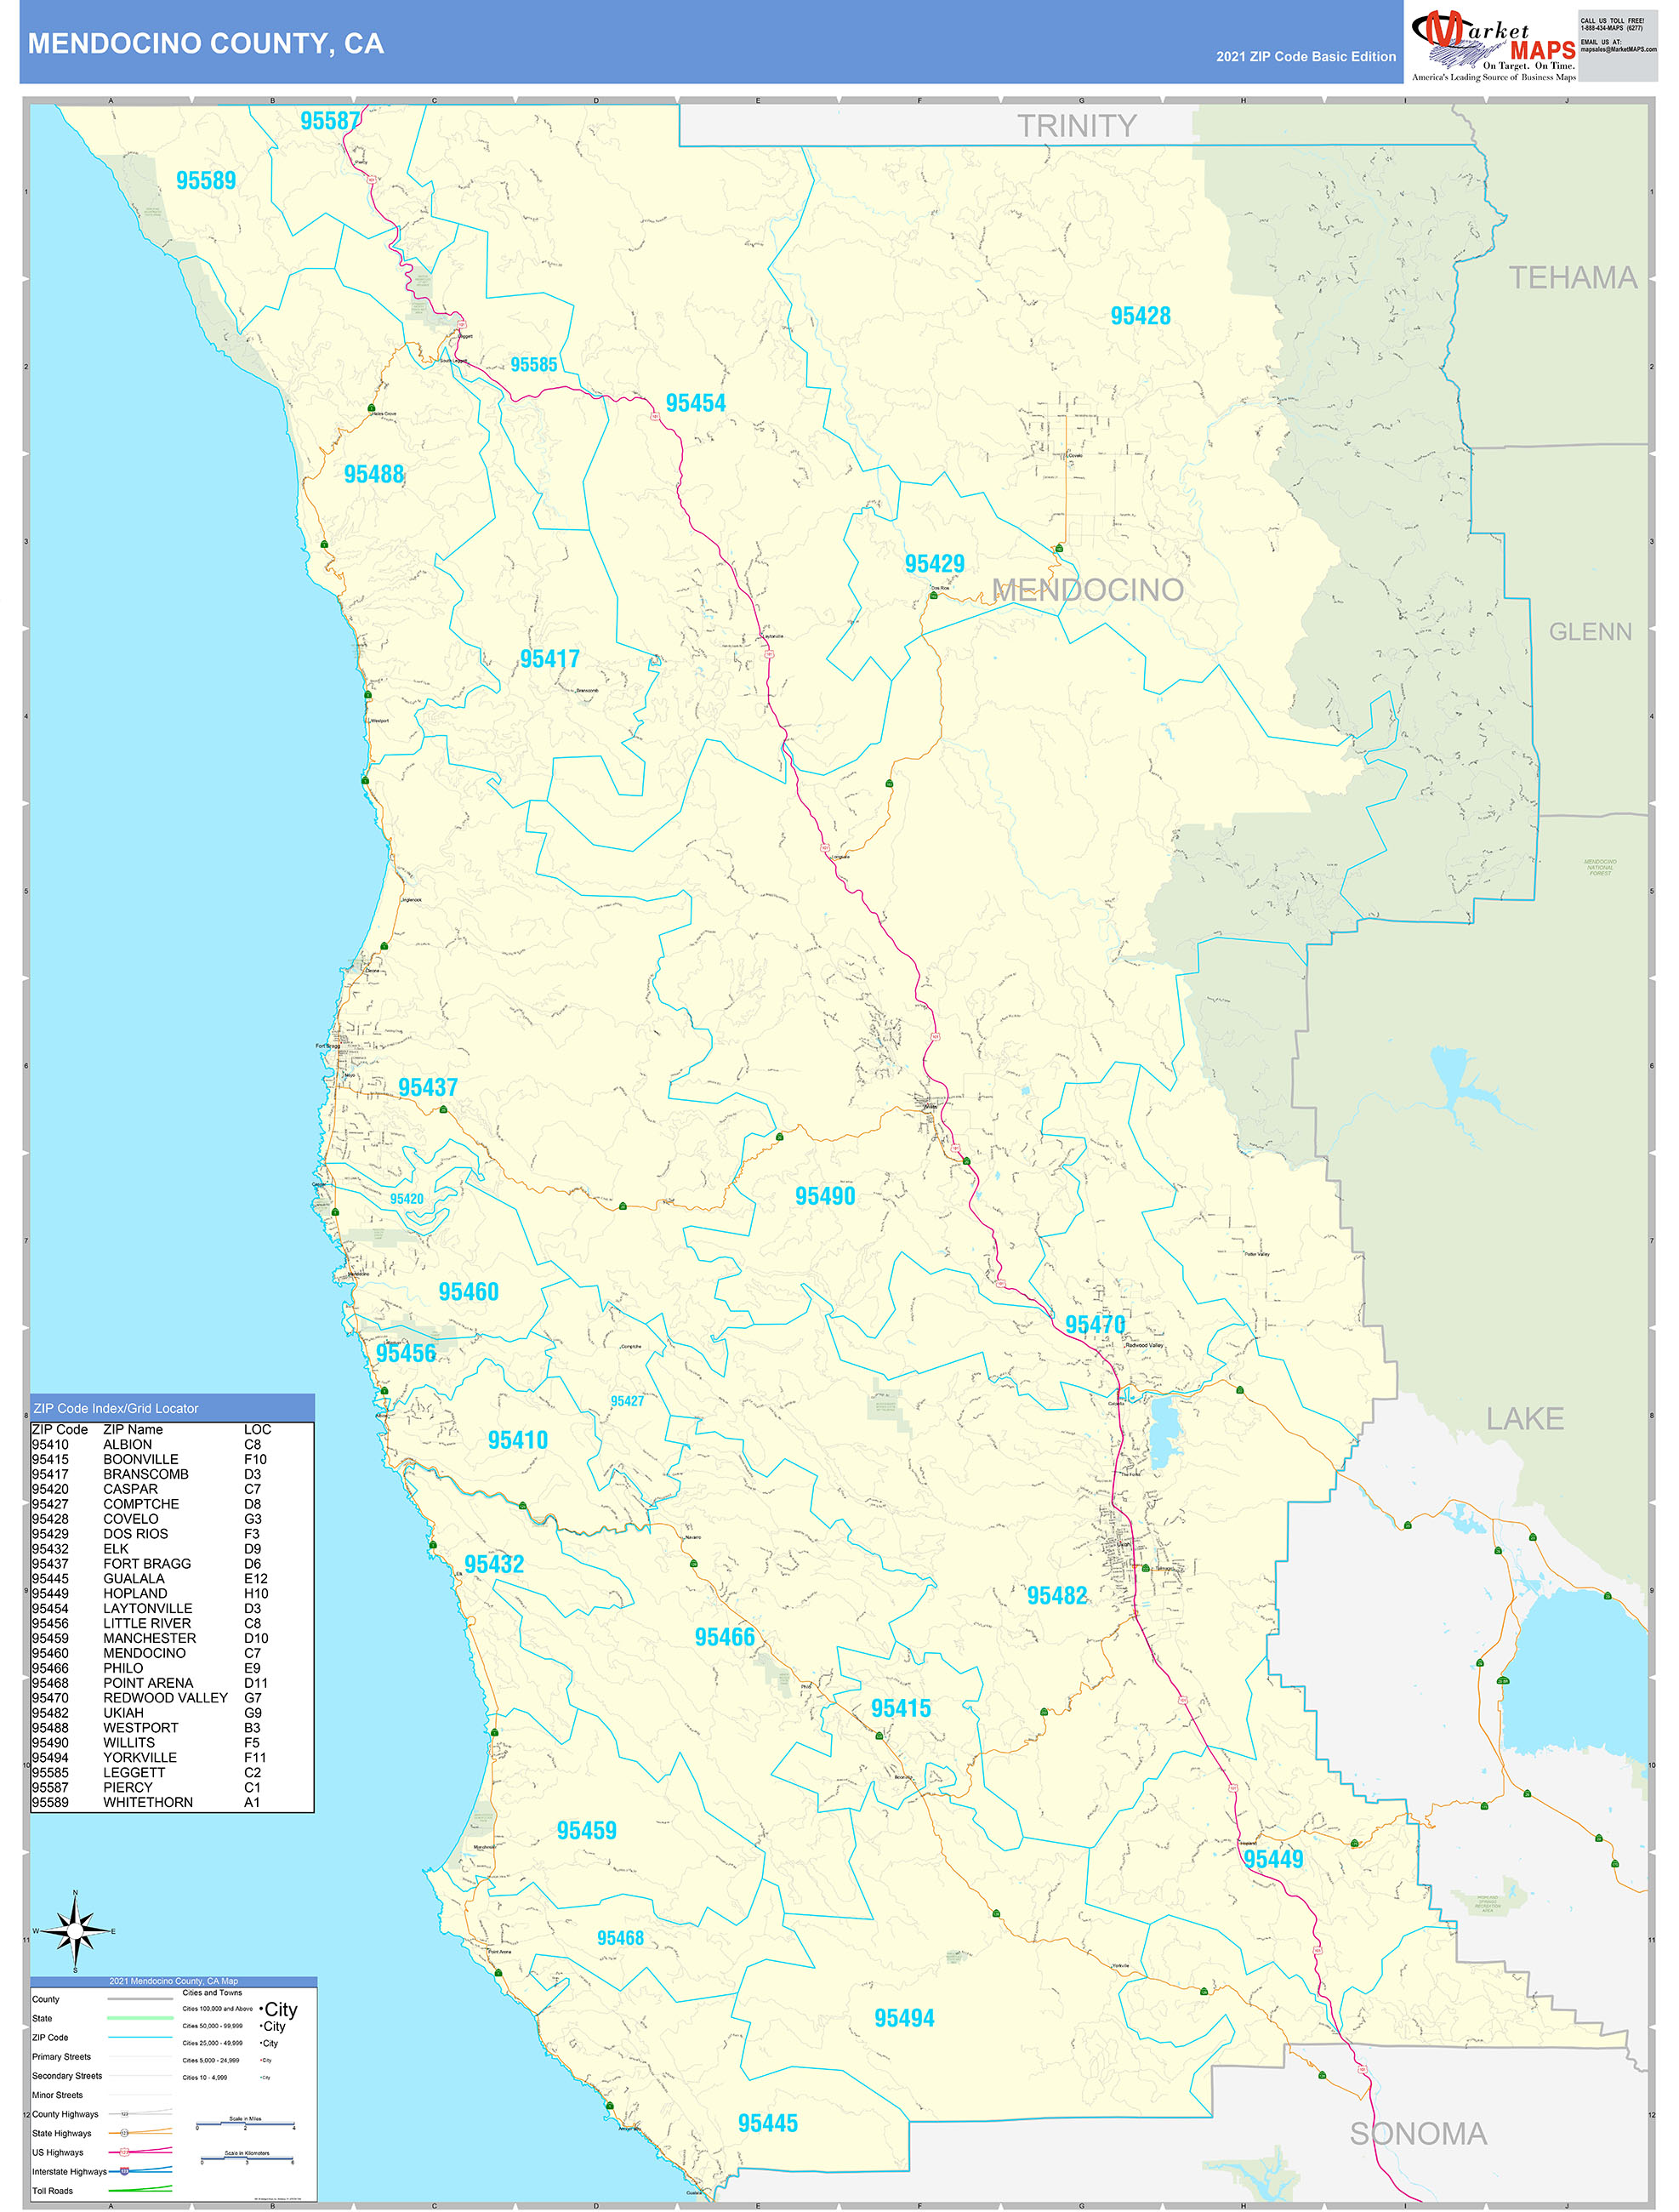 Mendocino County, CA Zip Code Wall Map Basic Style by MarketMAPS - MapSales